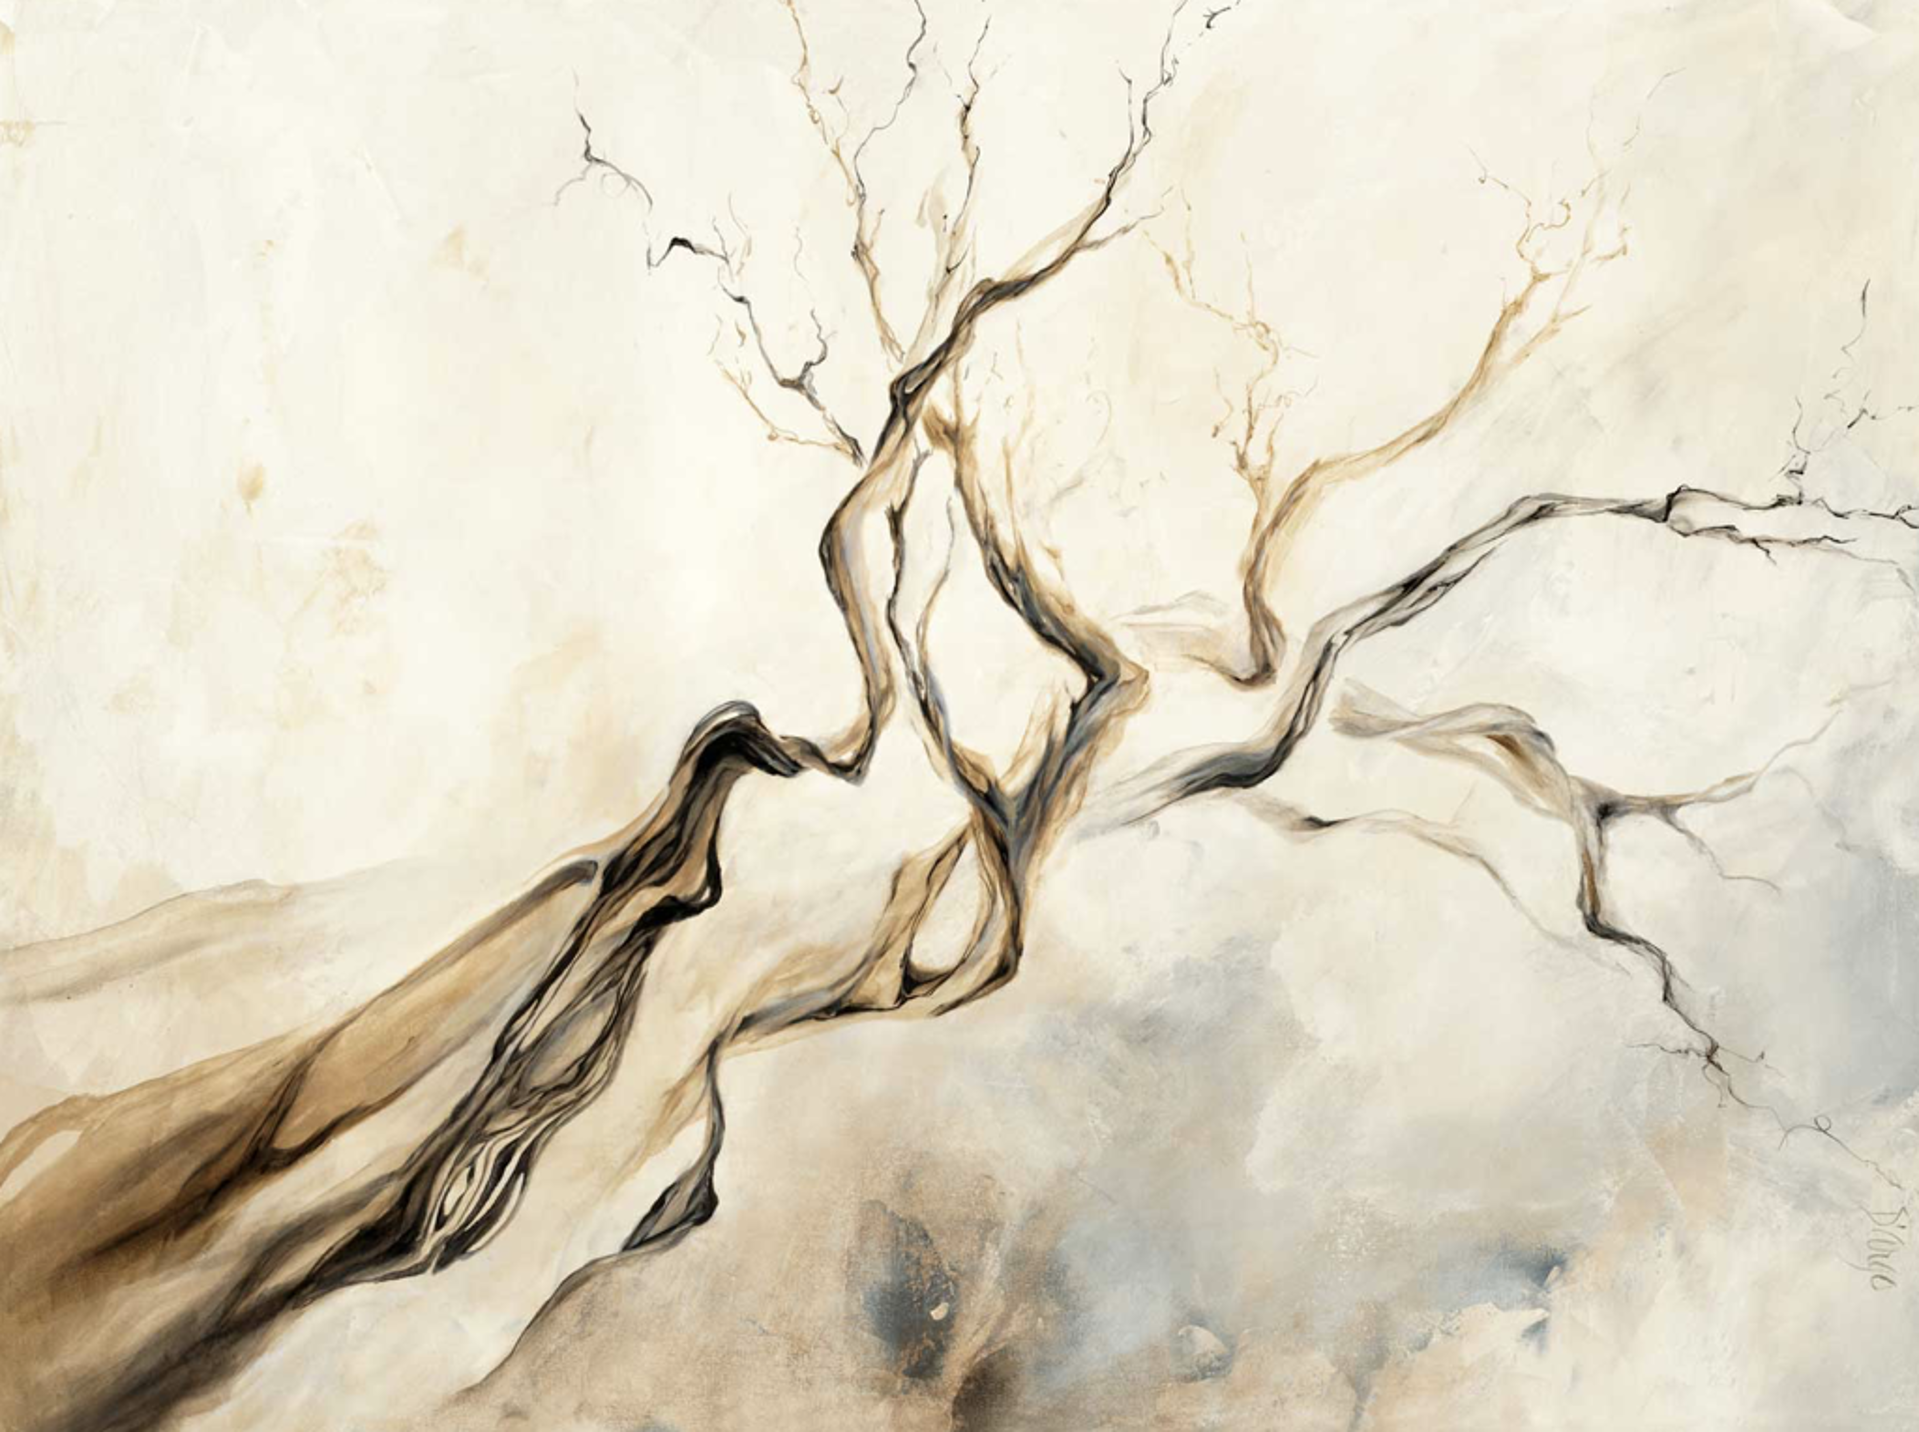 TWISTED BRANCHES by Dina D'Argo